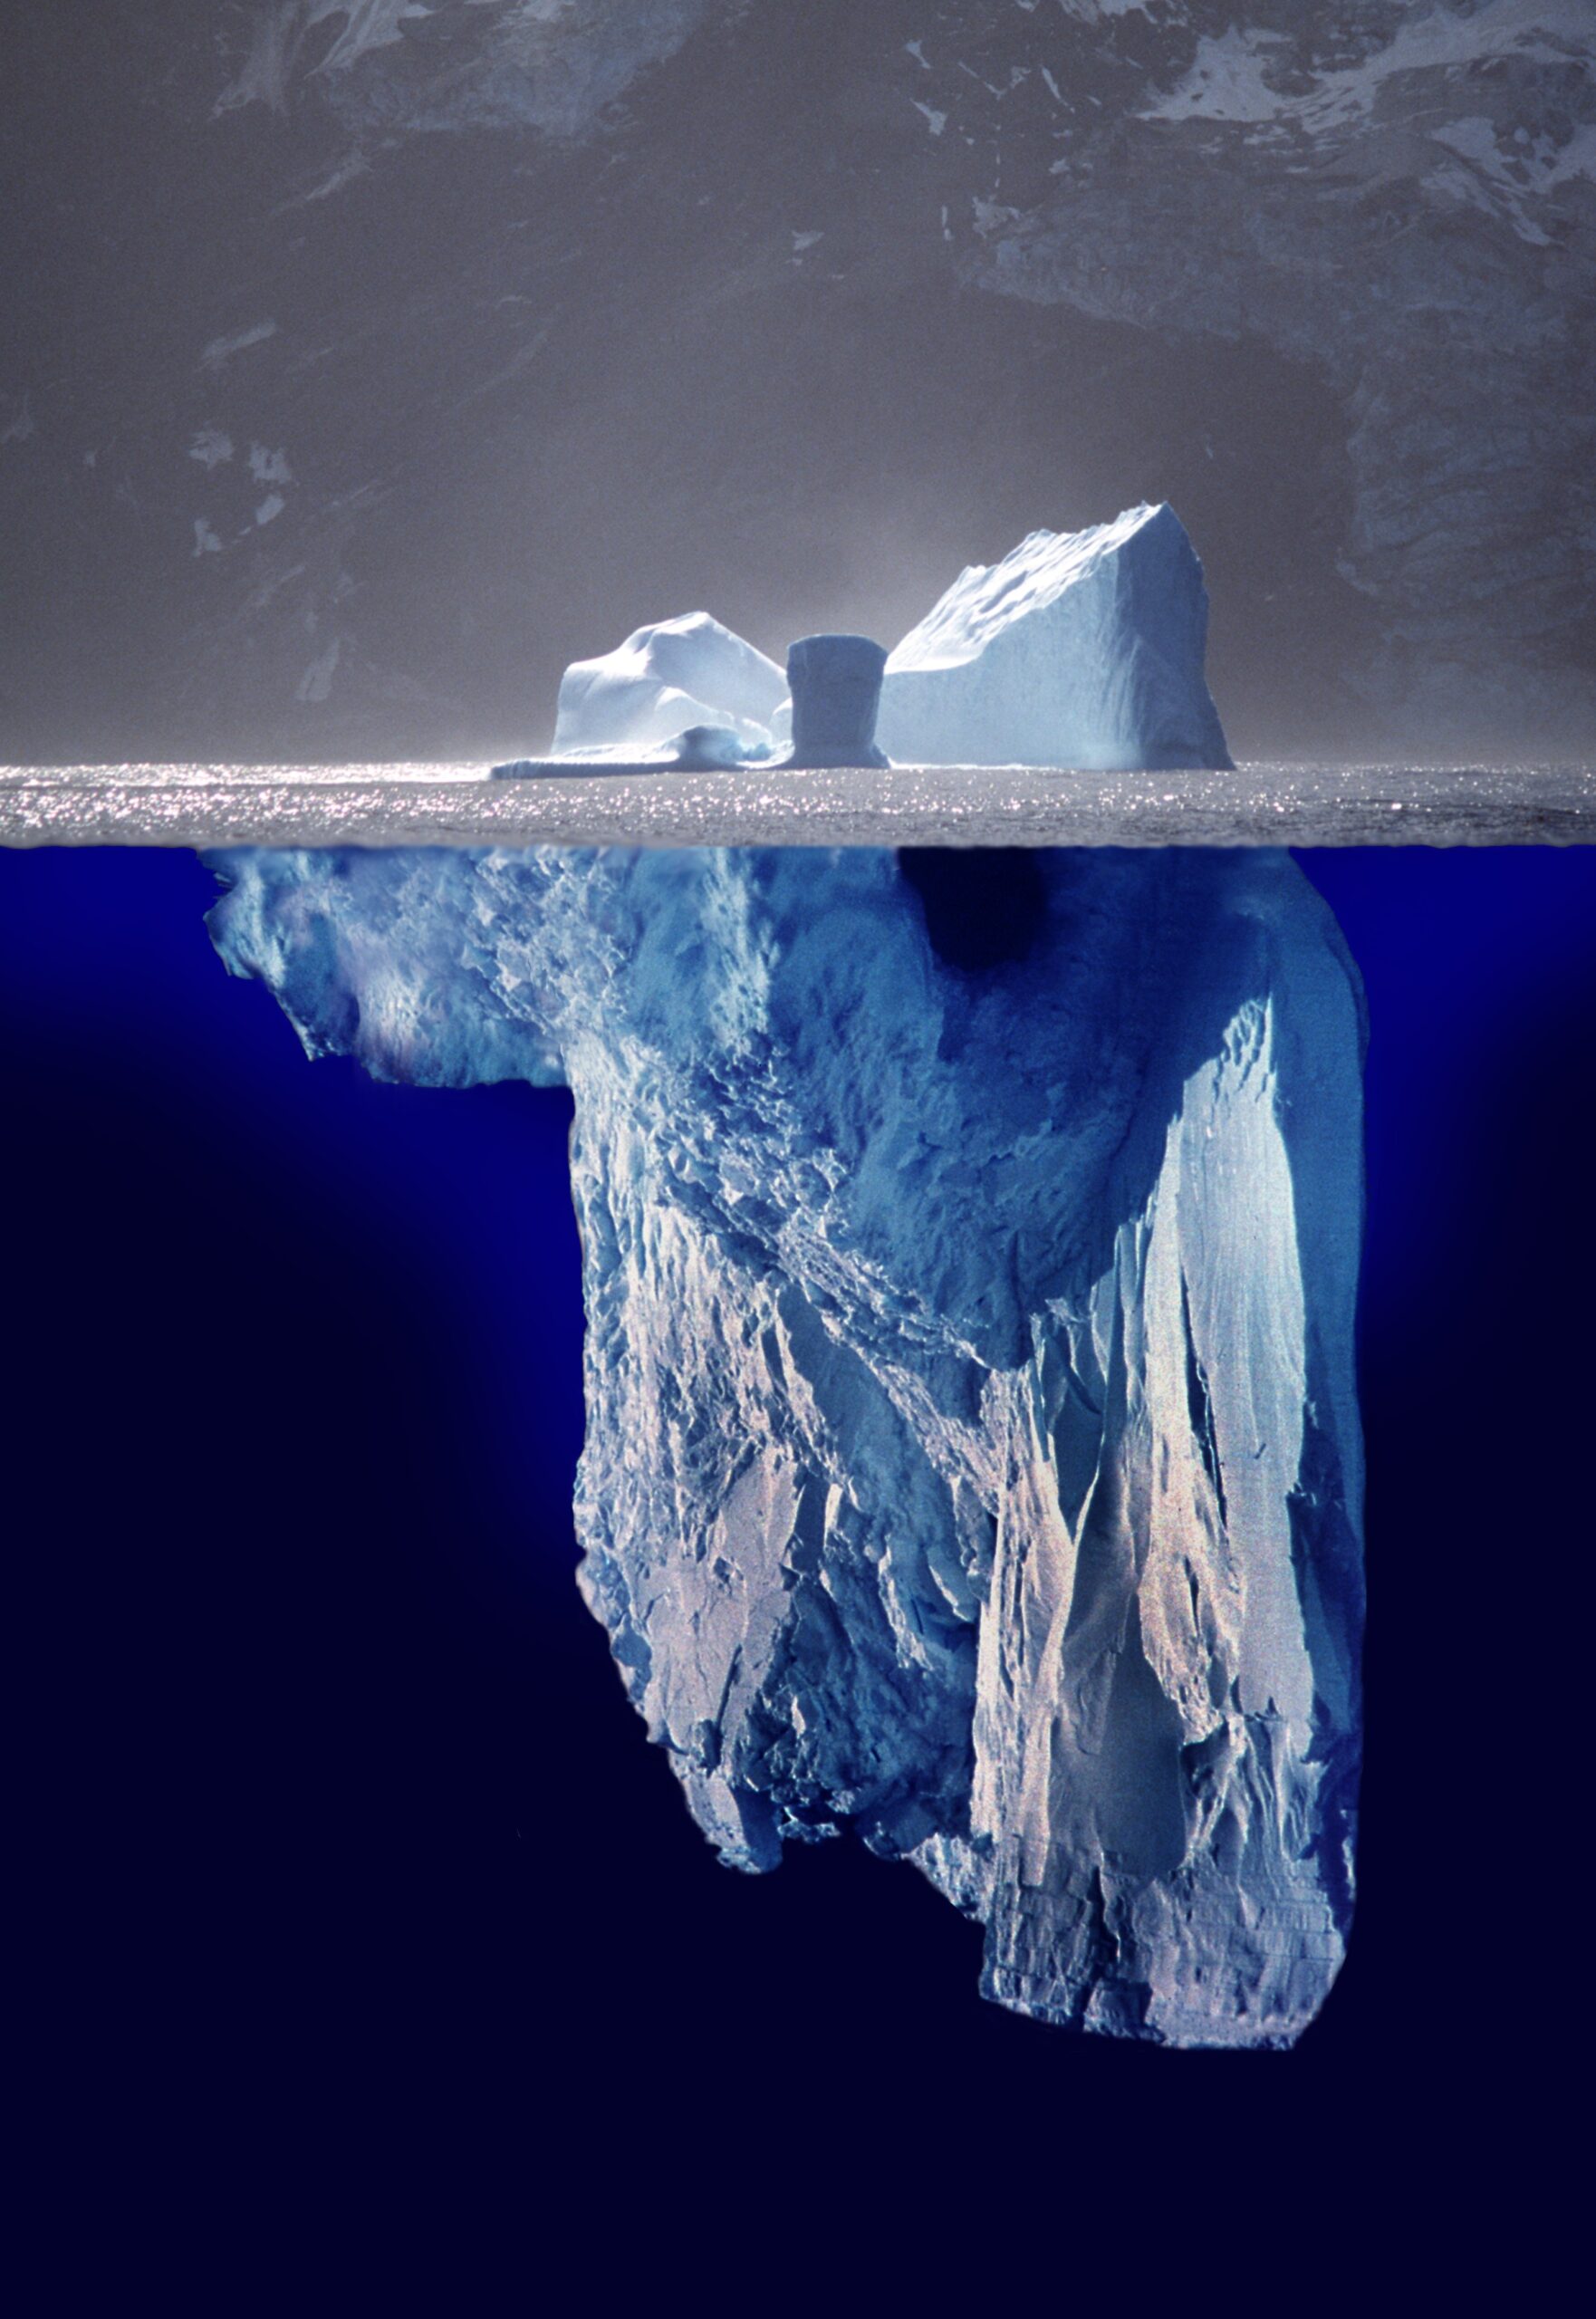  On digital engagement and icebergs